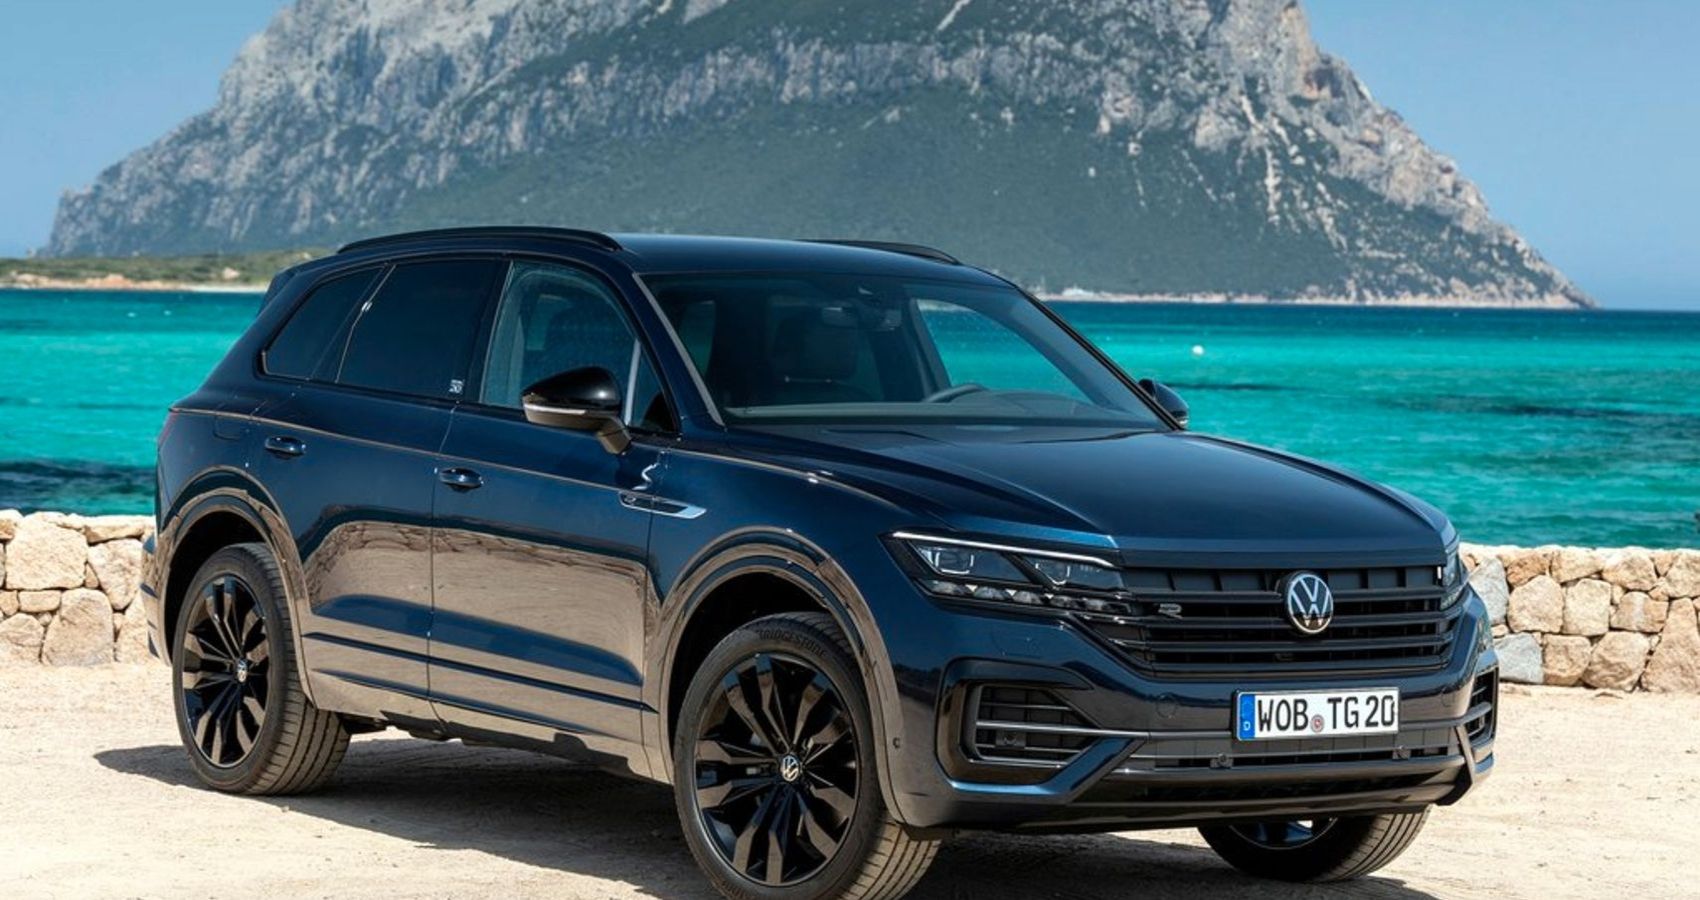 Why The Volkswagen Touareg Was A Beast Of An SUV And Should Return To